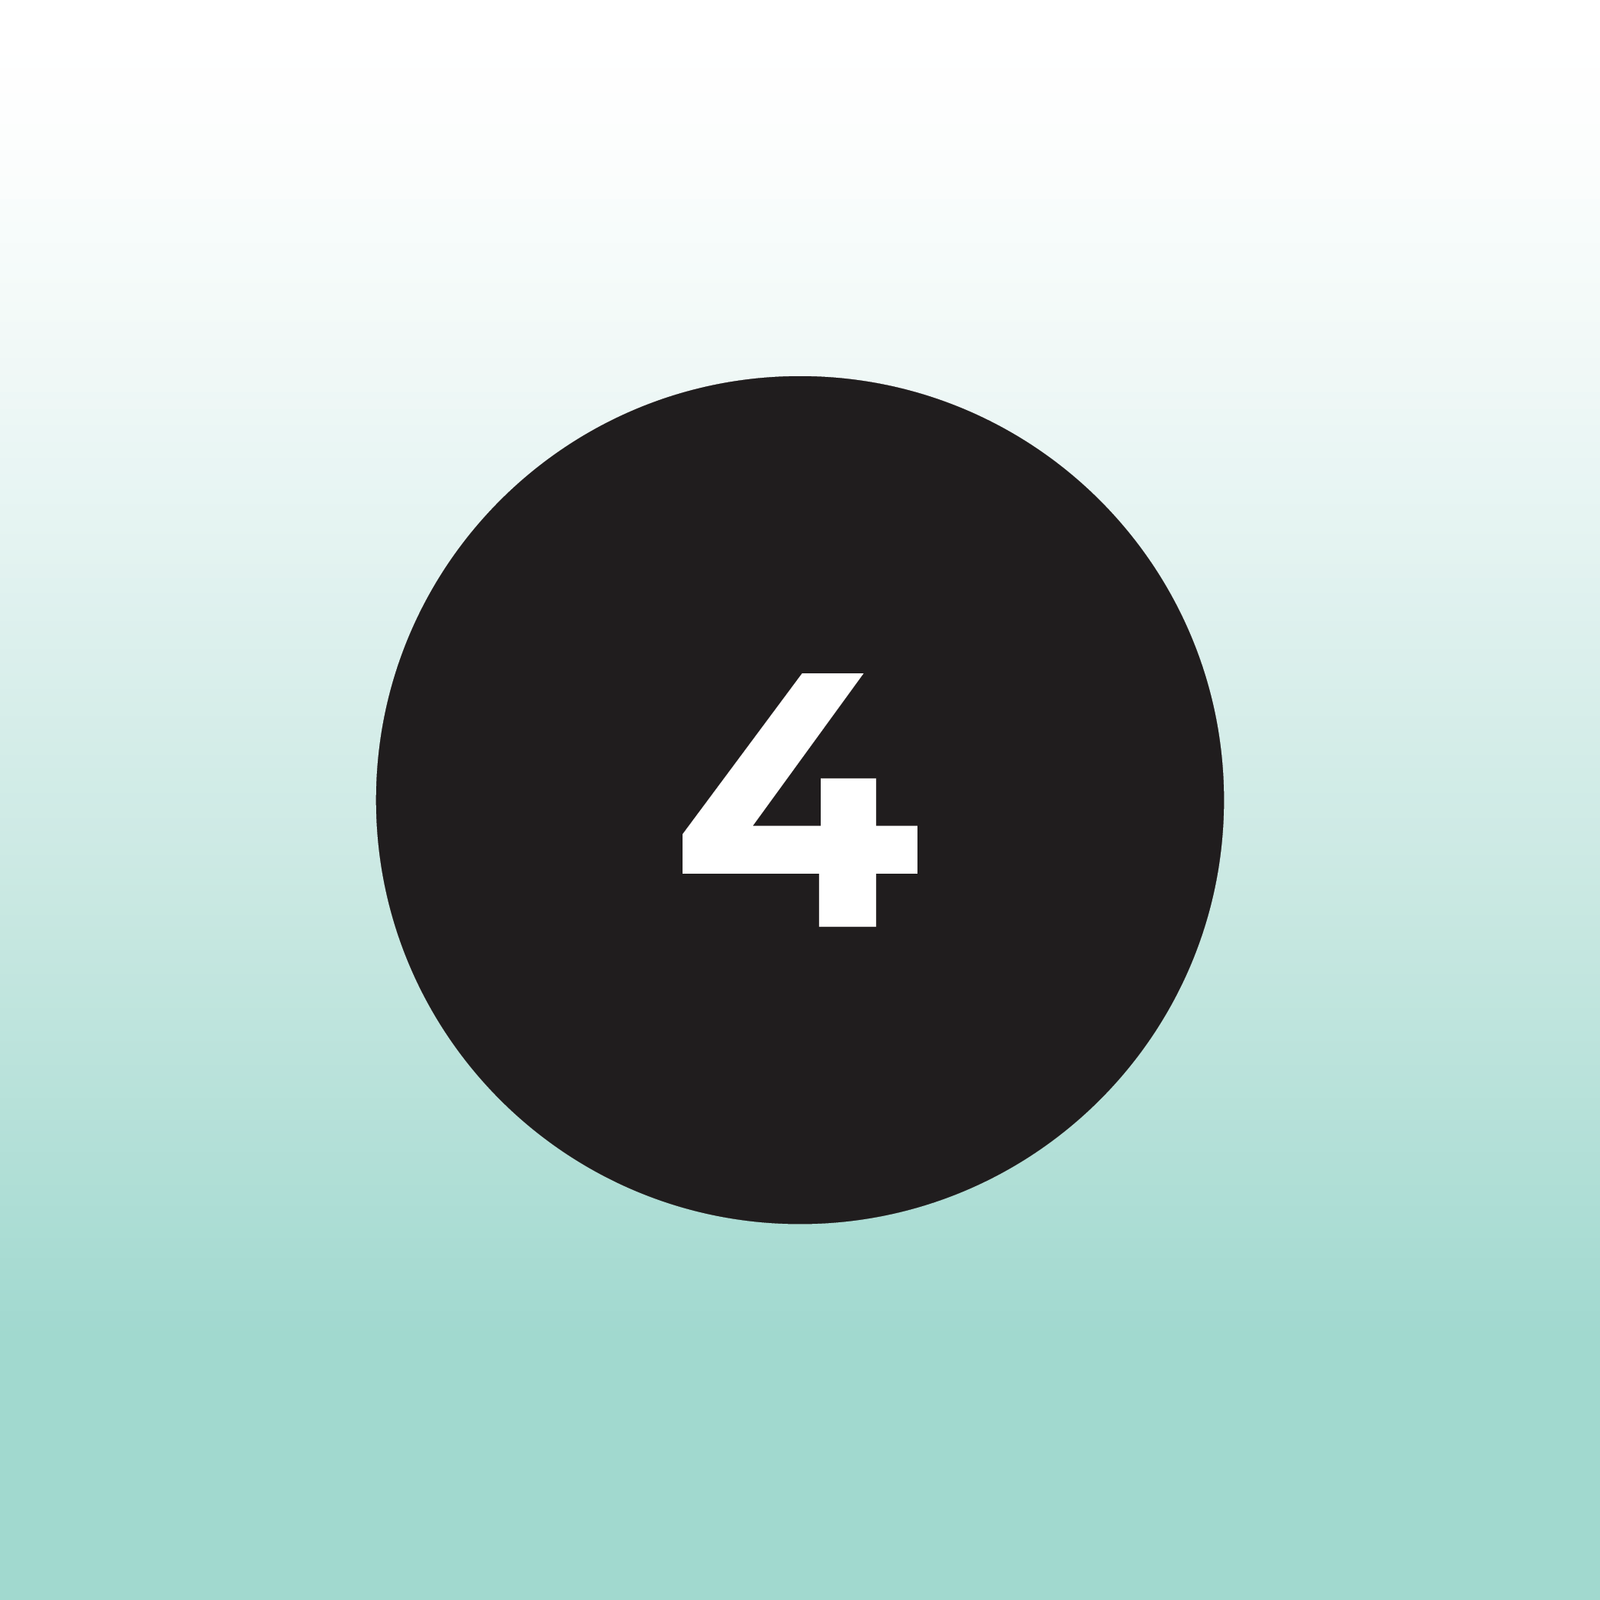 teal gradient background with a black circle and the number 4 in white in the center